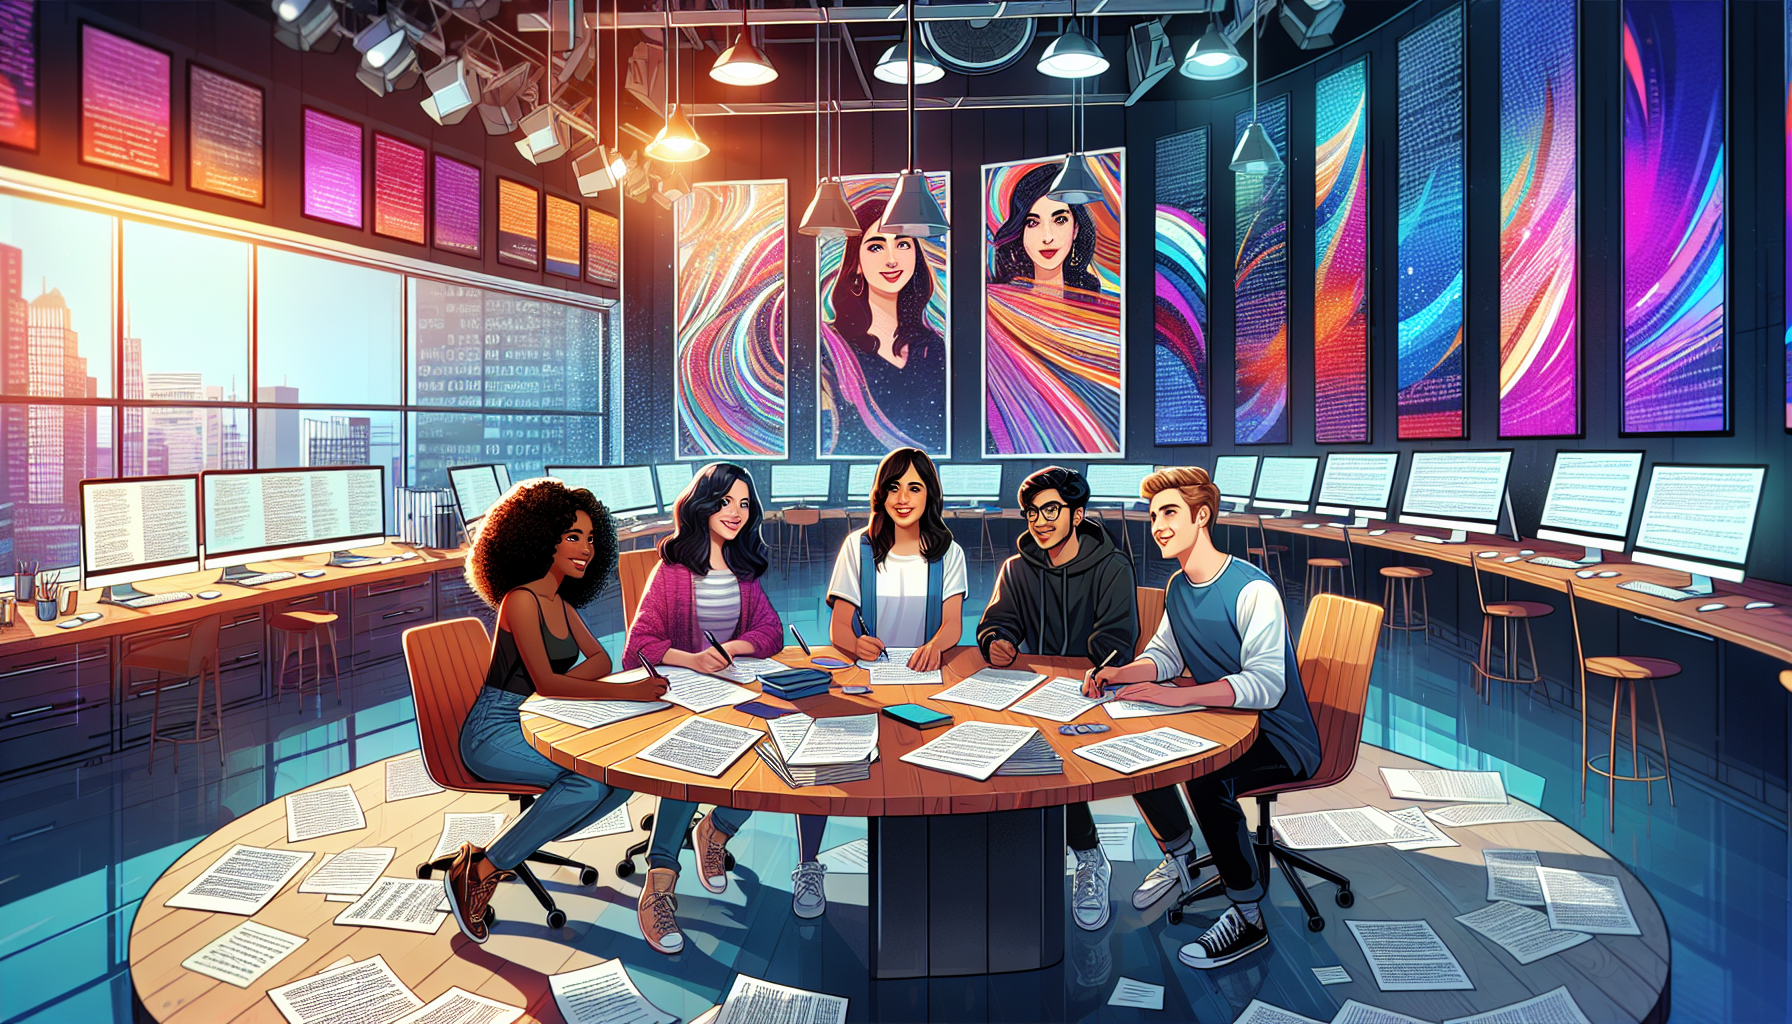 An artistic representation of a diverse group of young aspiring screenwriters brainstorming in a creative workshop environment, surrounded by film posters, scripts, and digital screens displaying famo